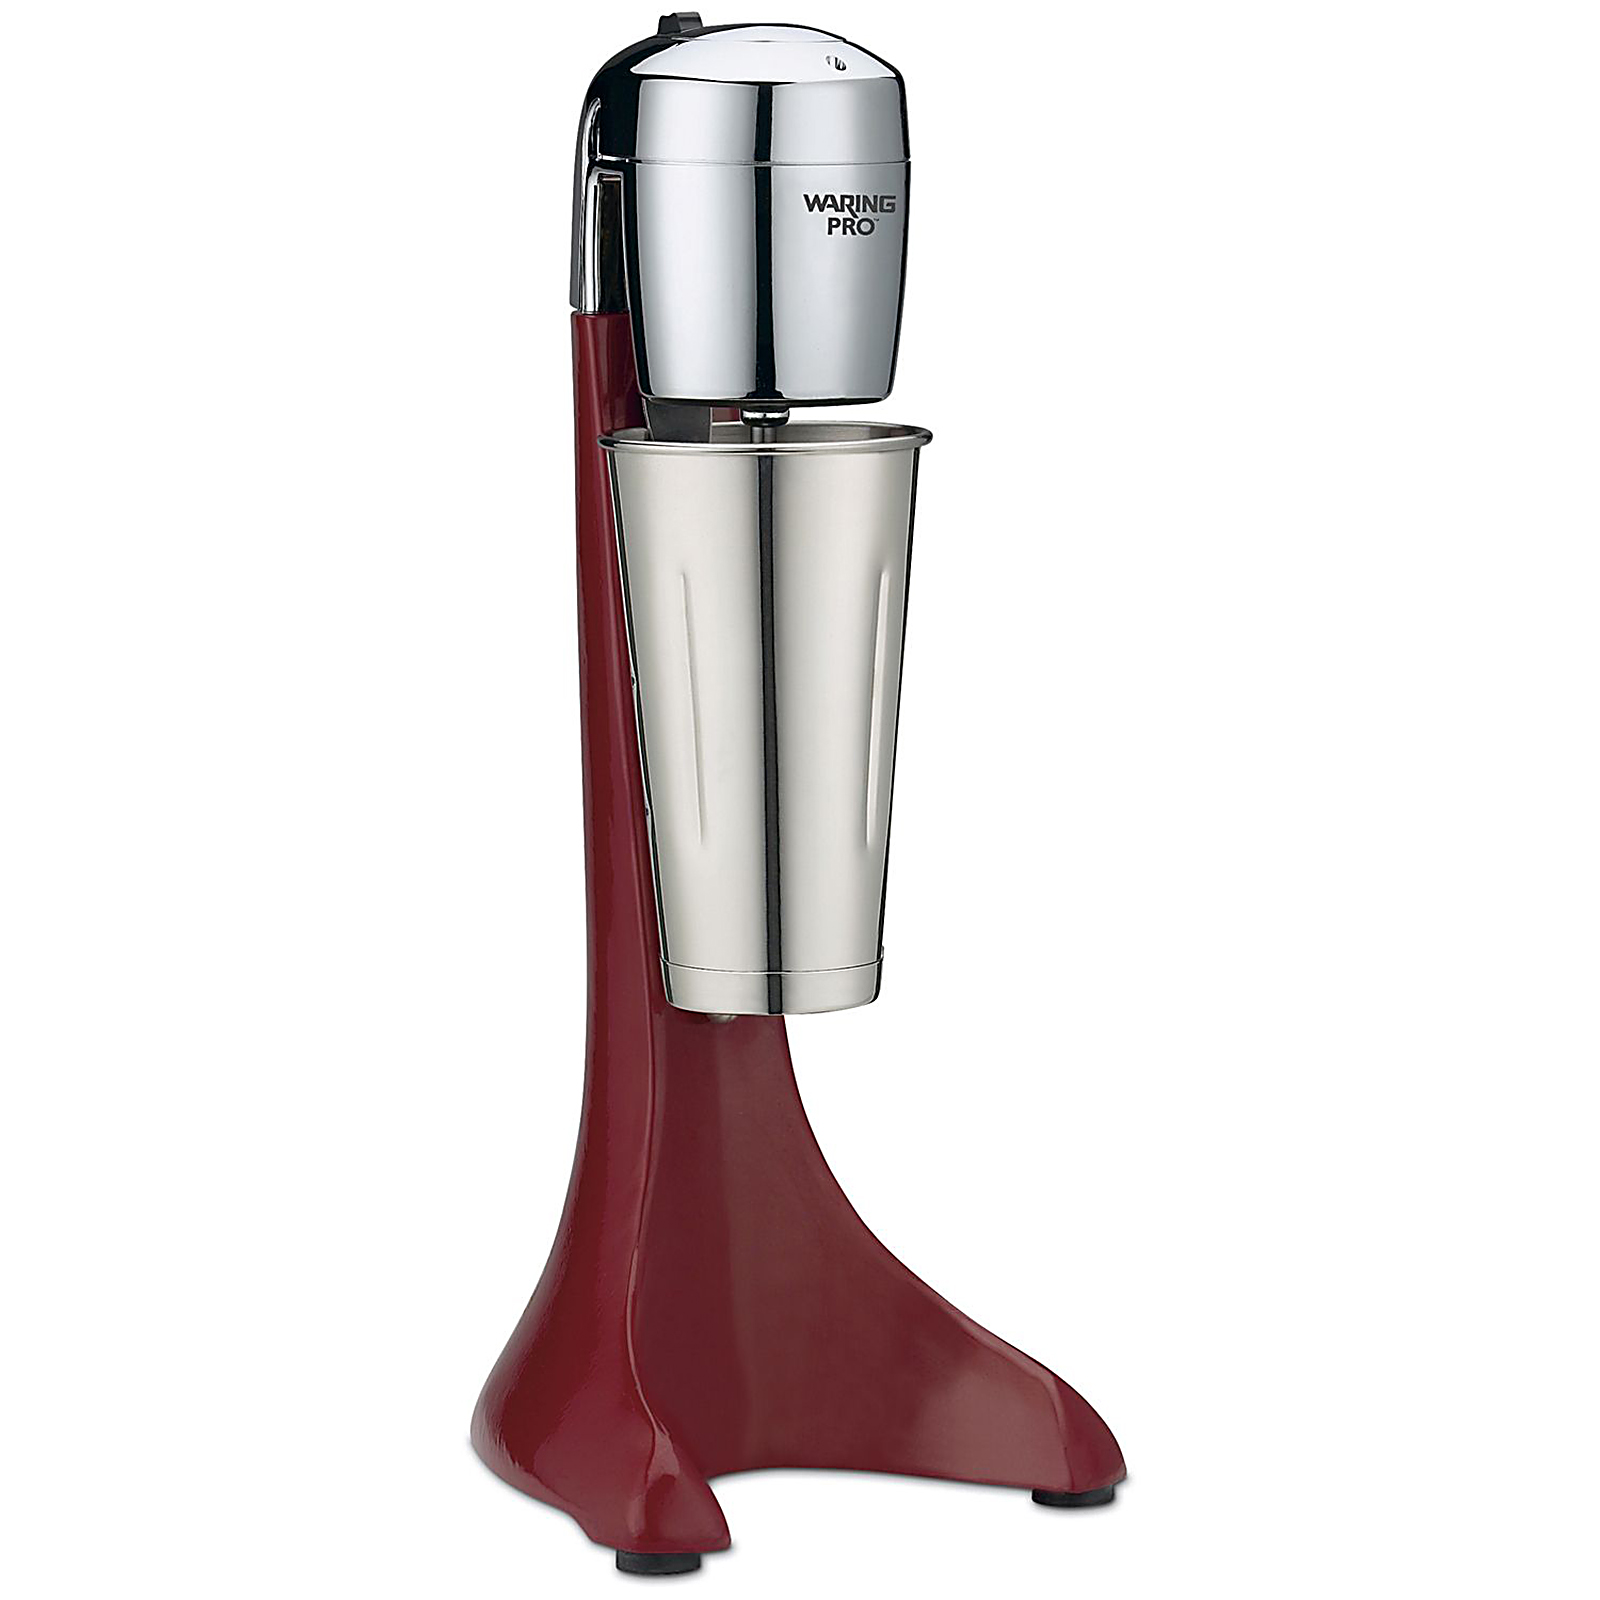 Waring Pro PDM104 24 oz. Professional Drink Mixer - Chili Red